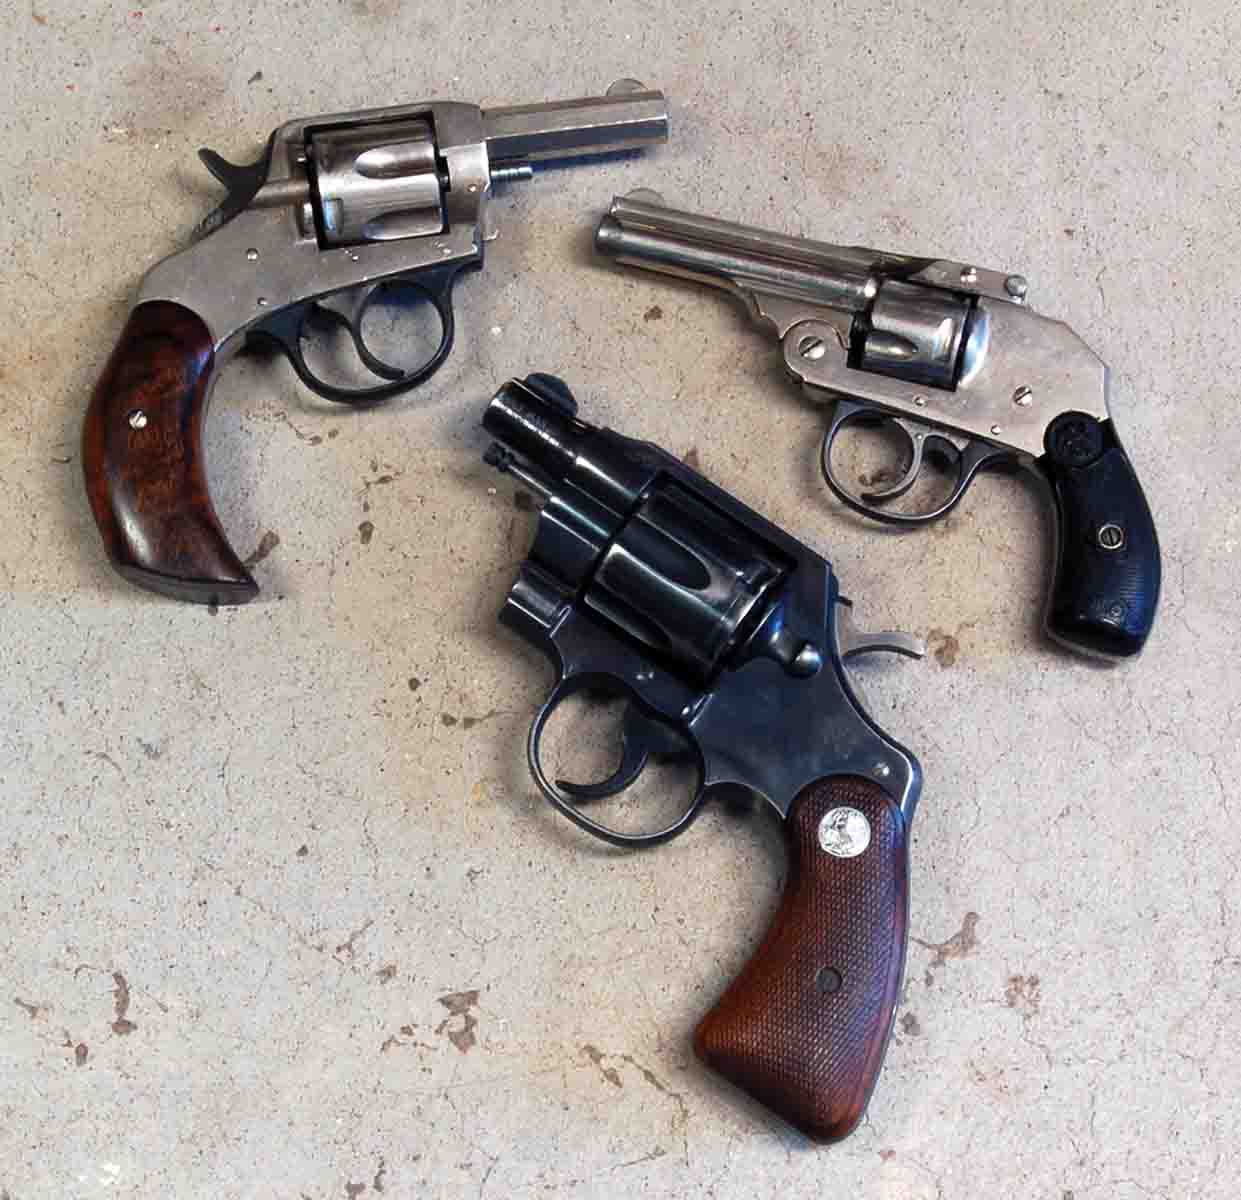 Small .32s include a (1) H&R and a (2) Iver Johnson. A (3) Colt Marshall .38 Special is shown for comparison.